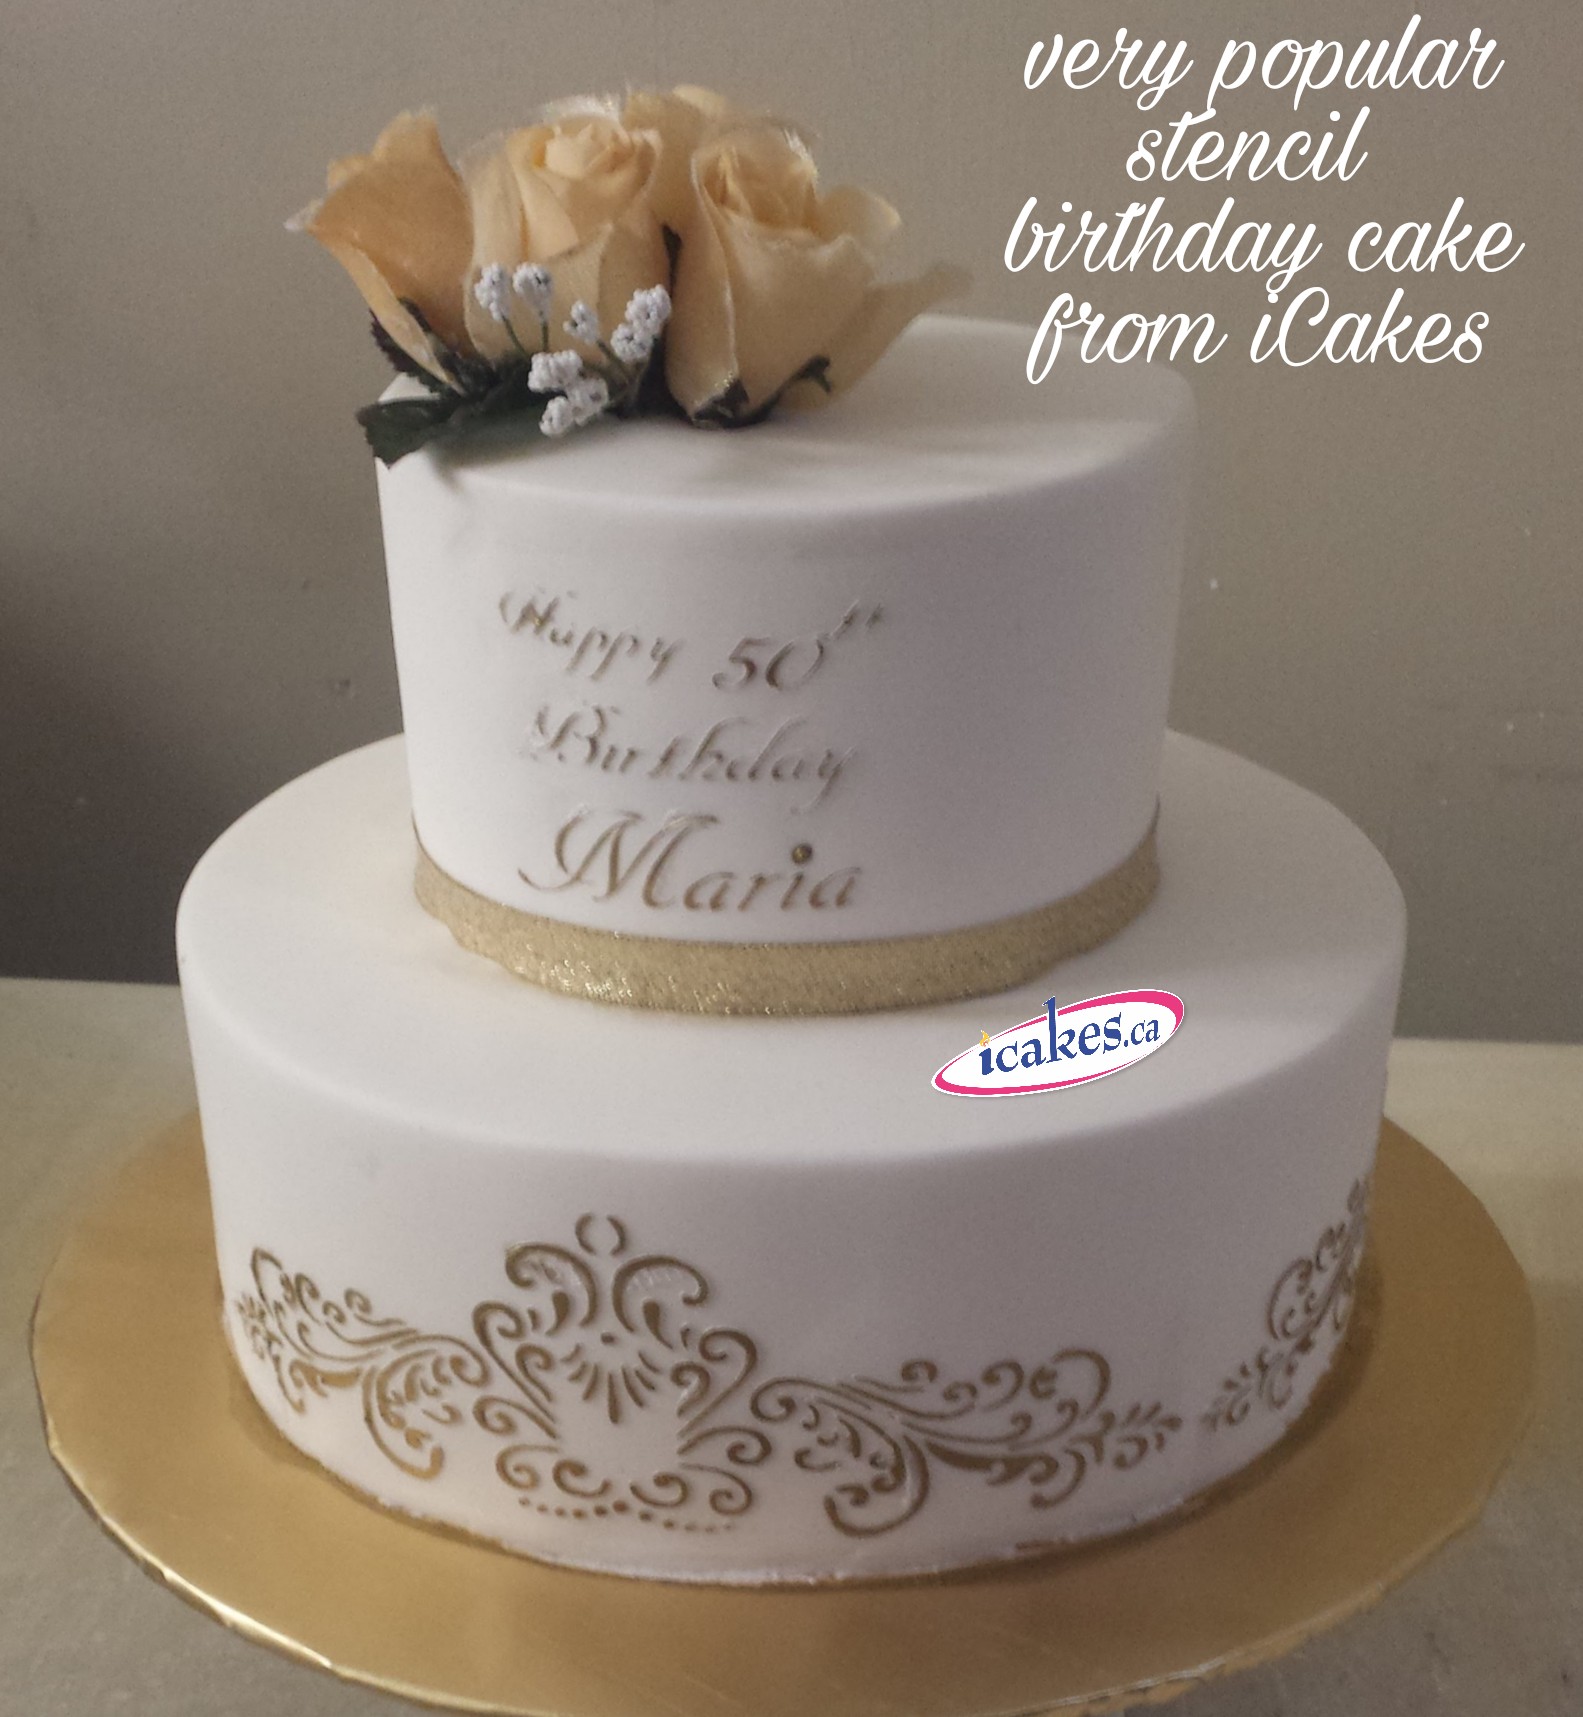 2 Tier Personalized Stencil, Silk Flowers, Exclusive Fondant Birthday Cake For Woman